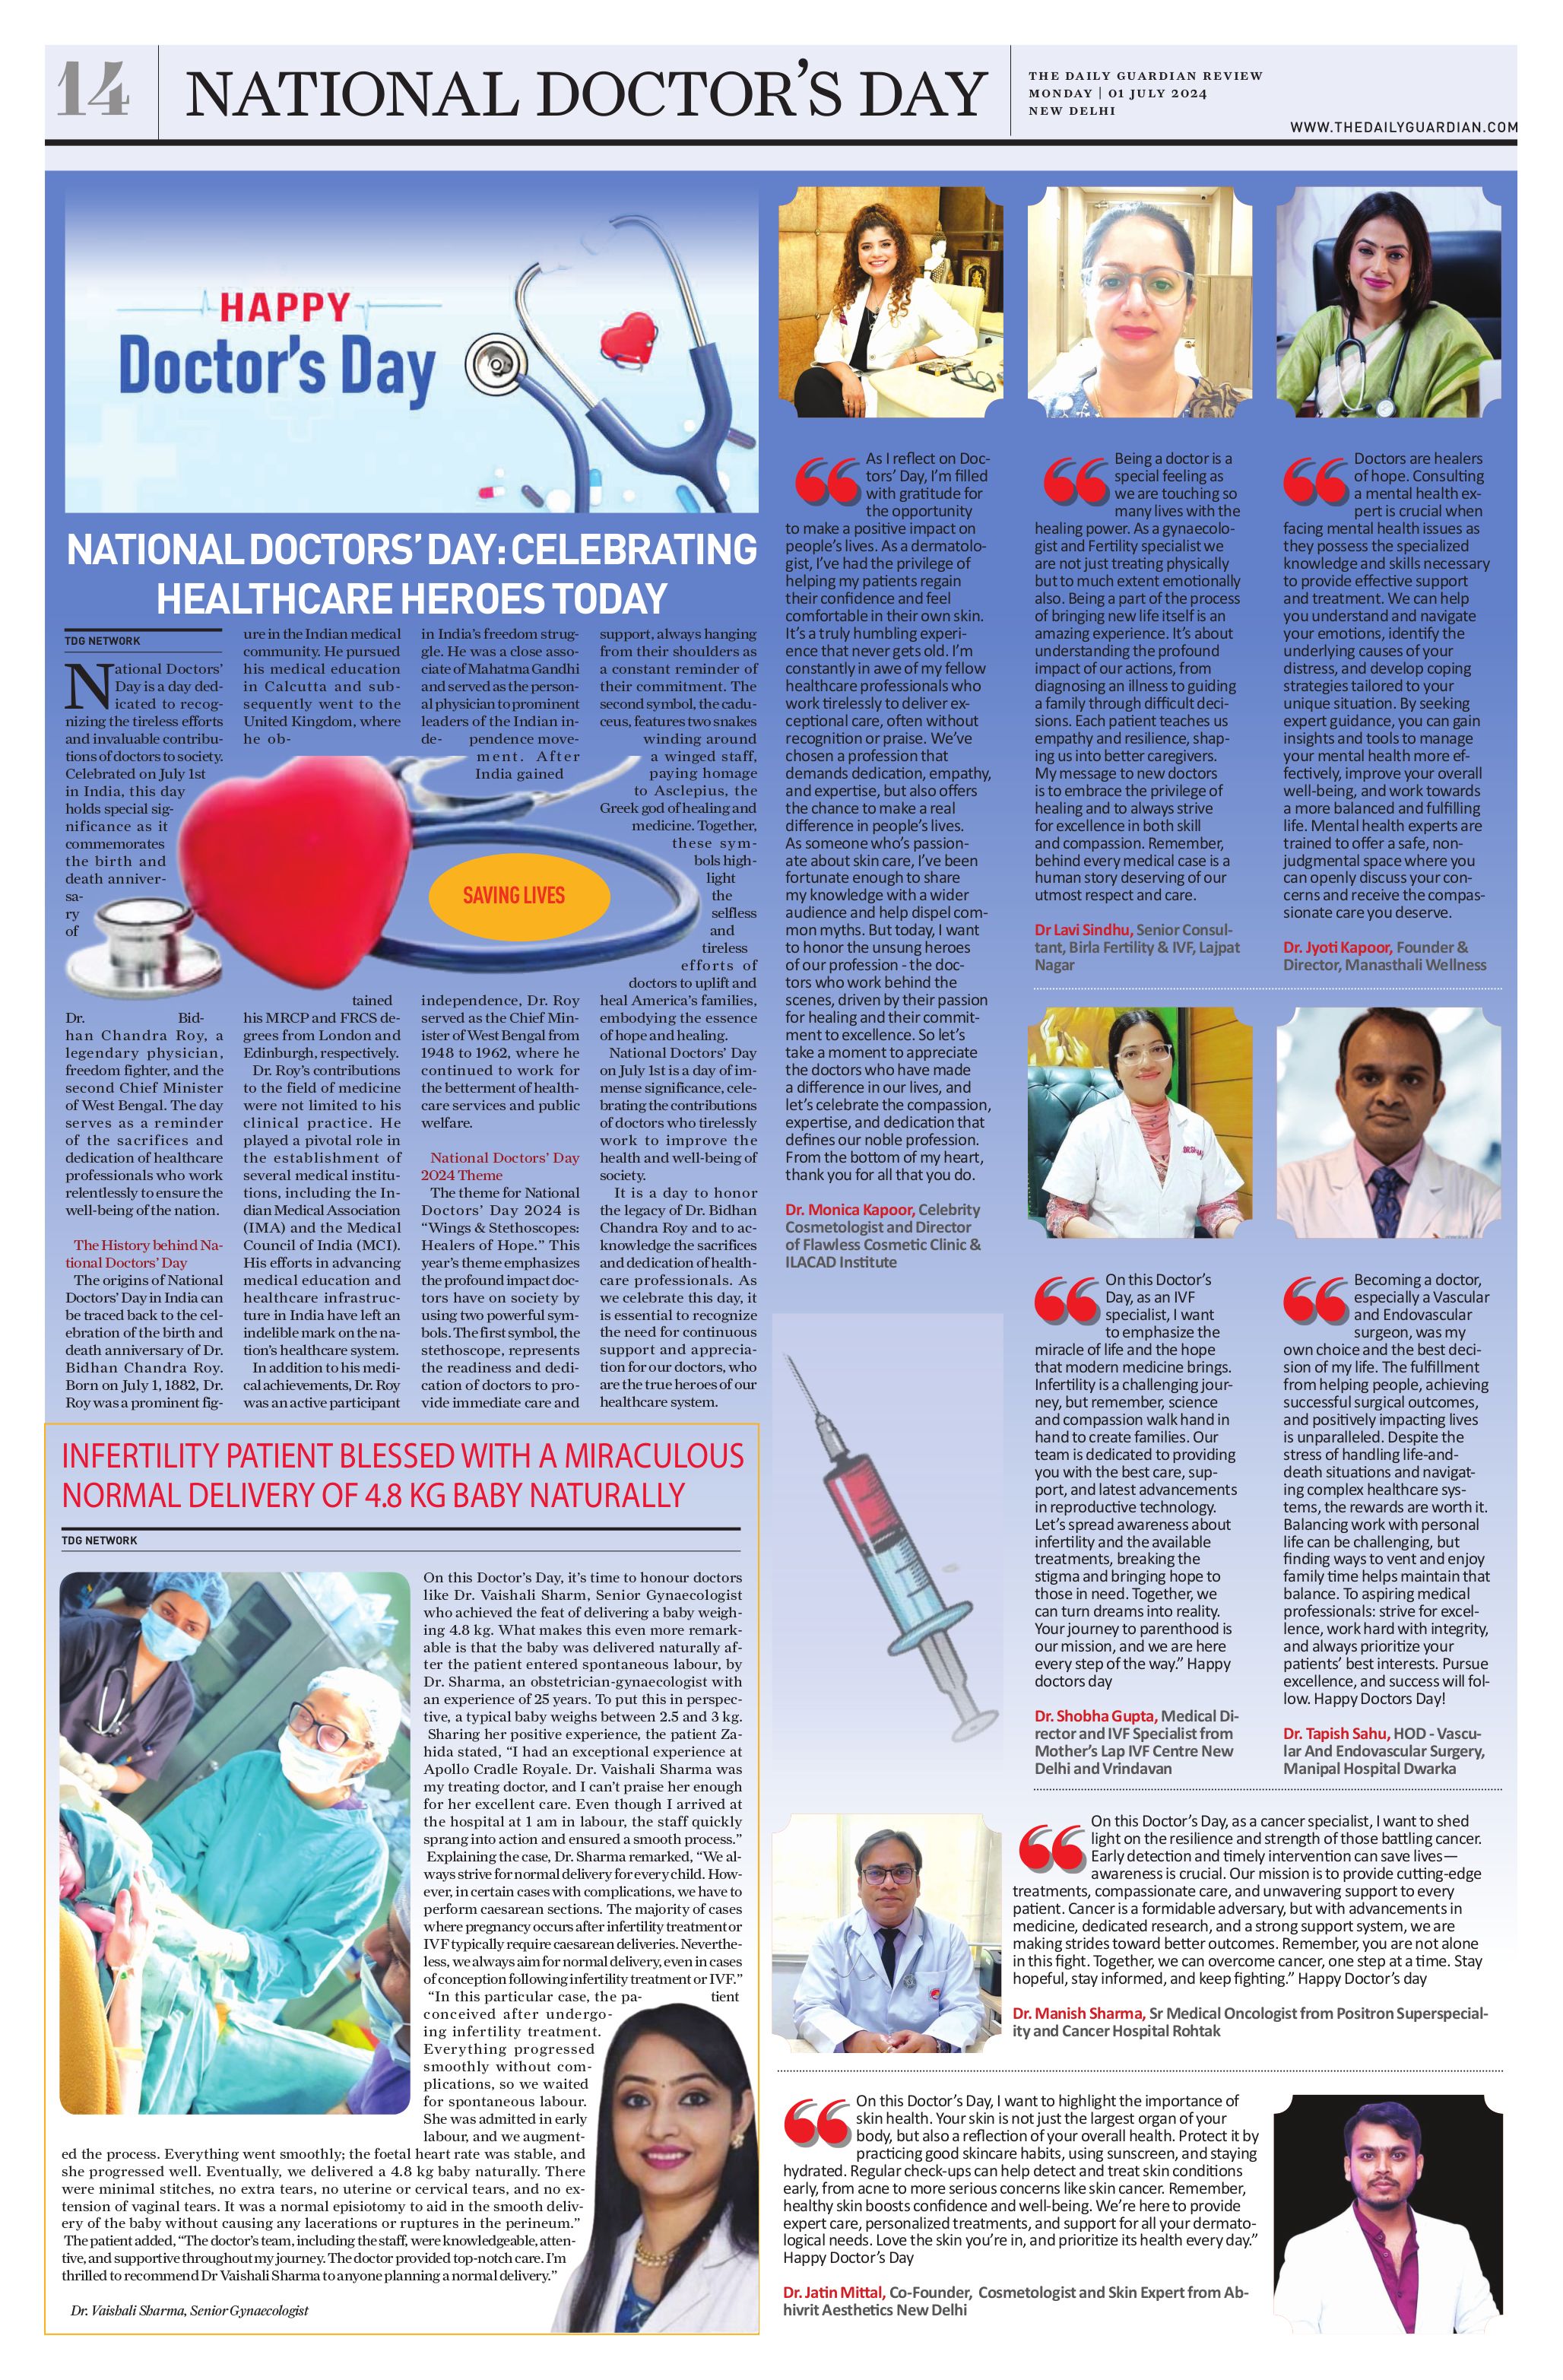 The Daily Guardian With Dr Vaishali Sharma MD (AIIMS)